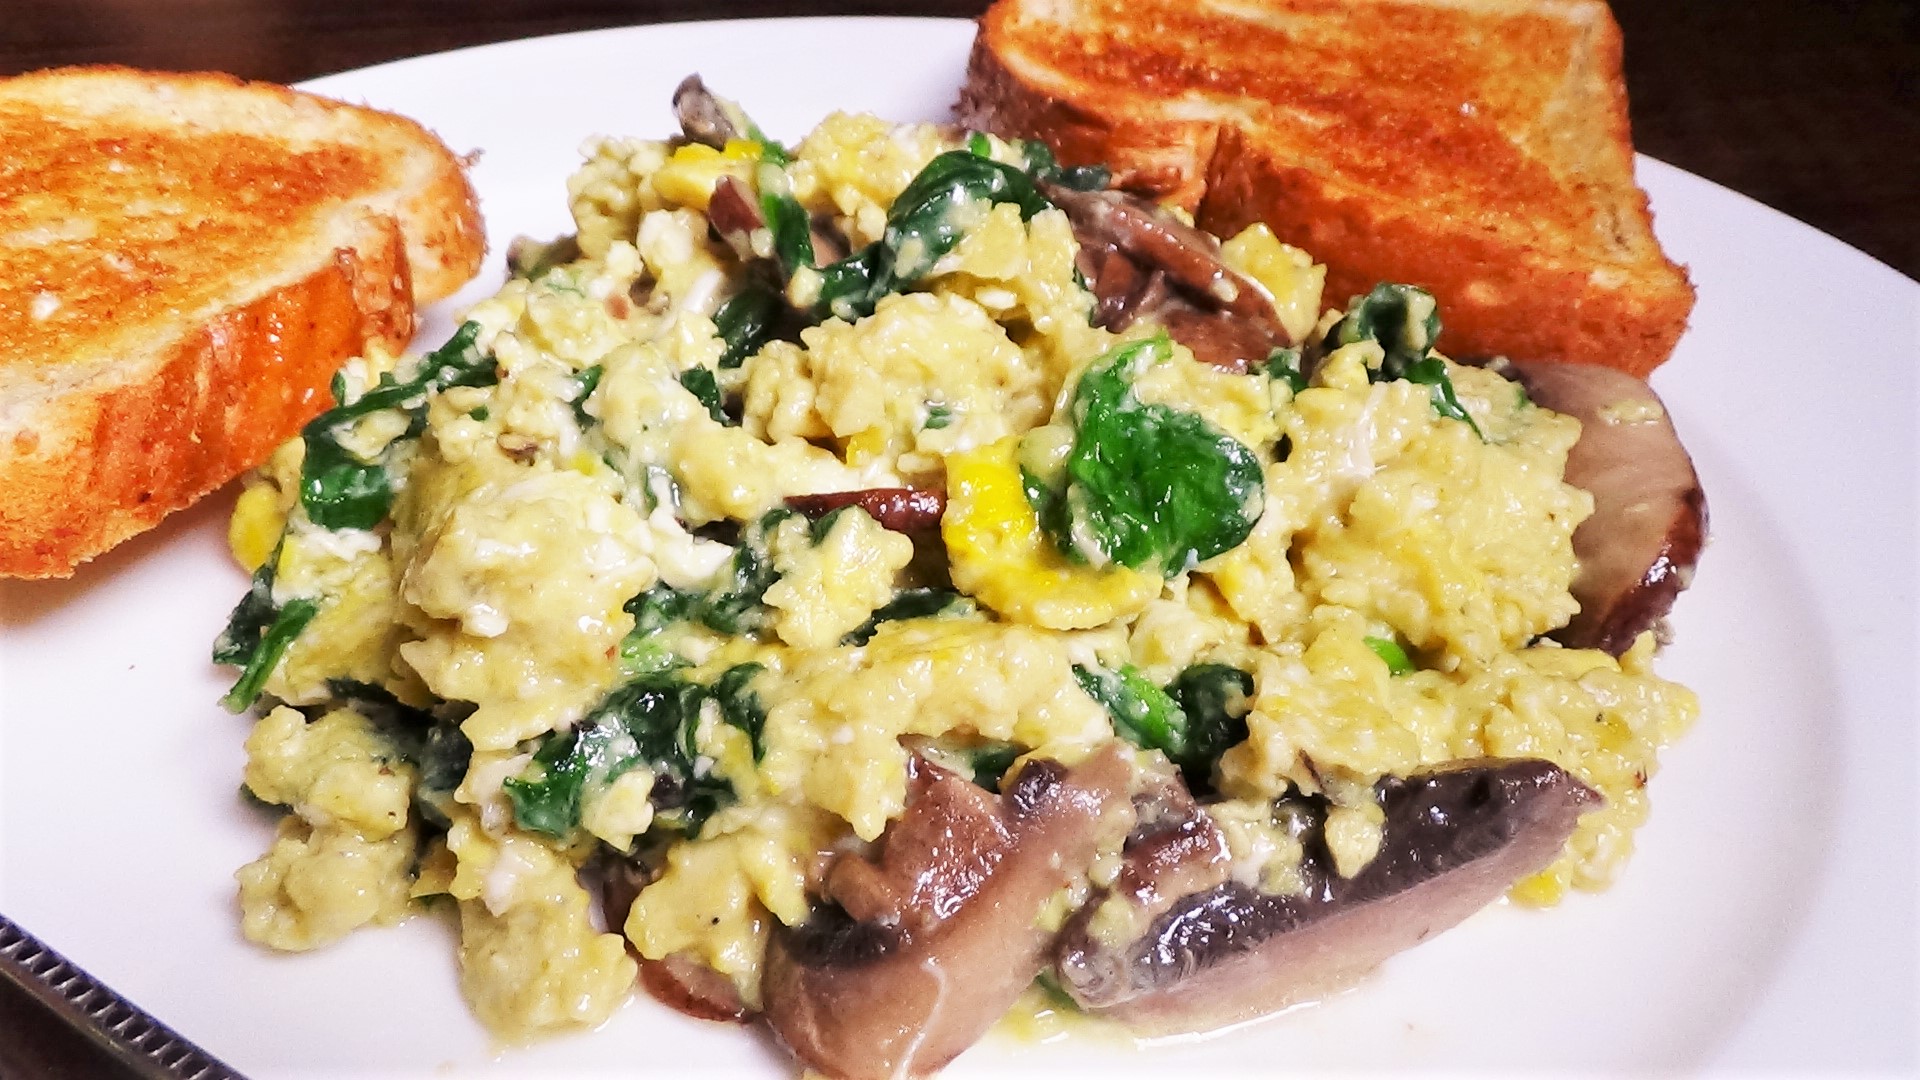 Scrambled Eggs with Spinach, Mushrooms and Brie